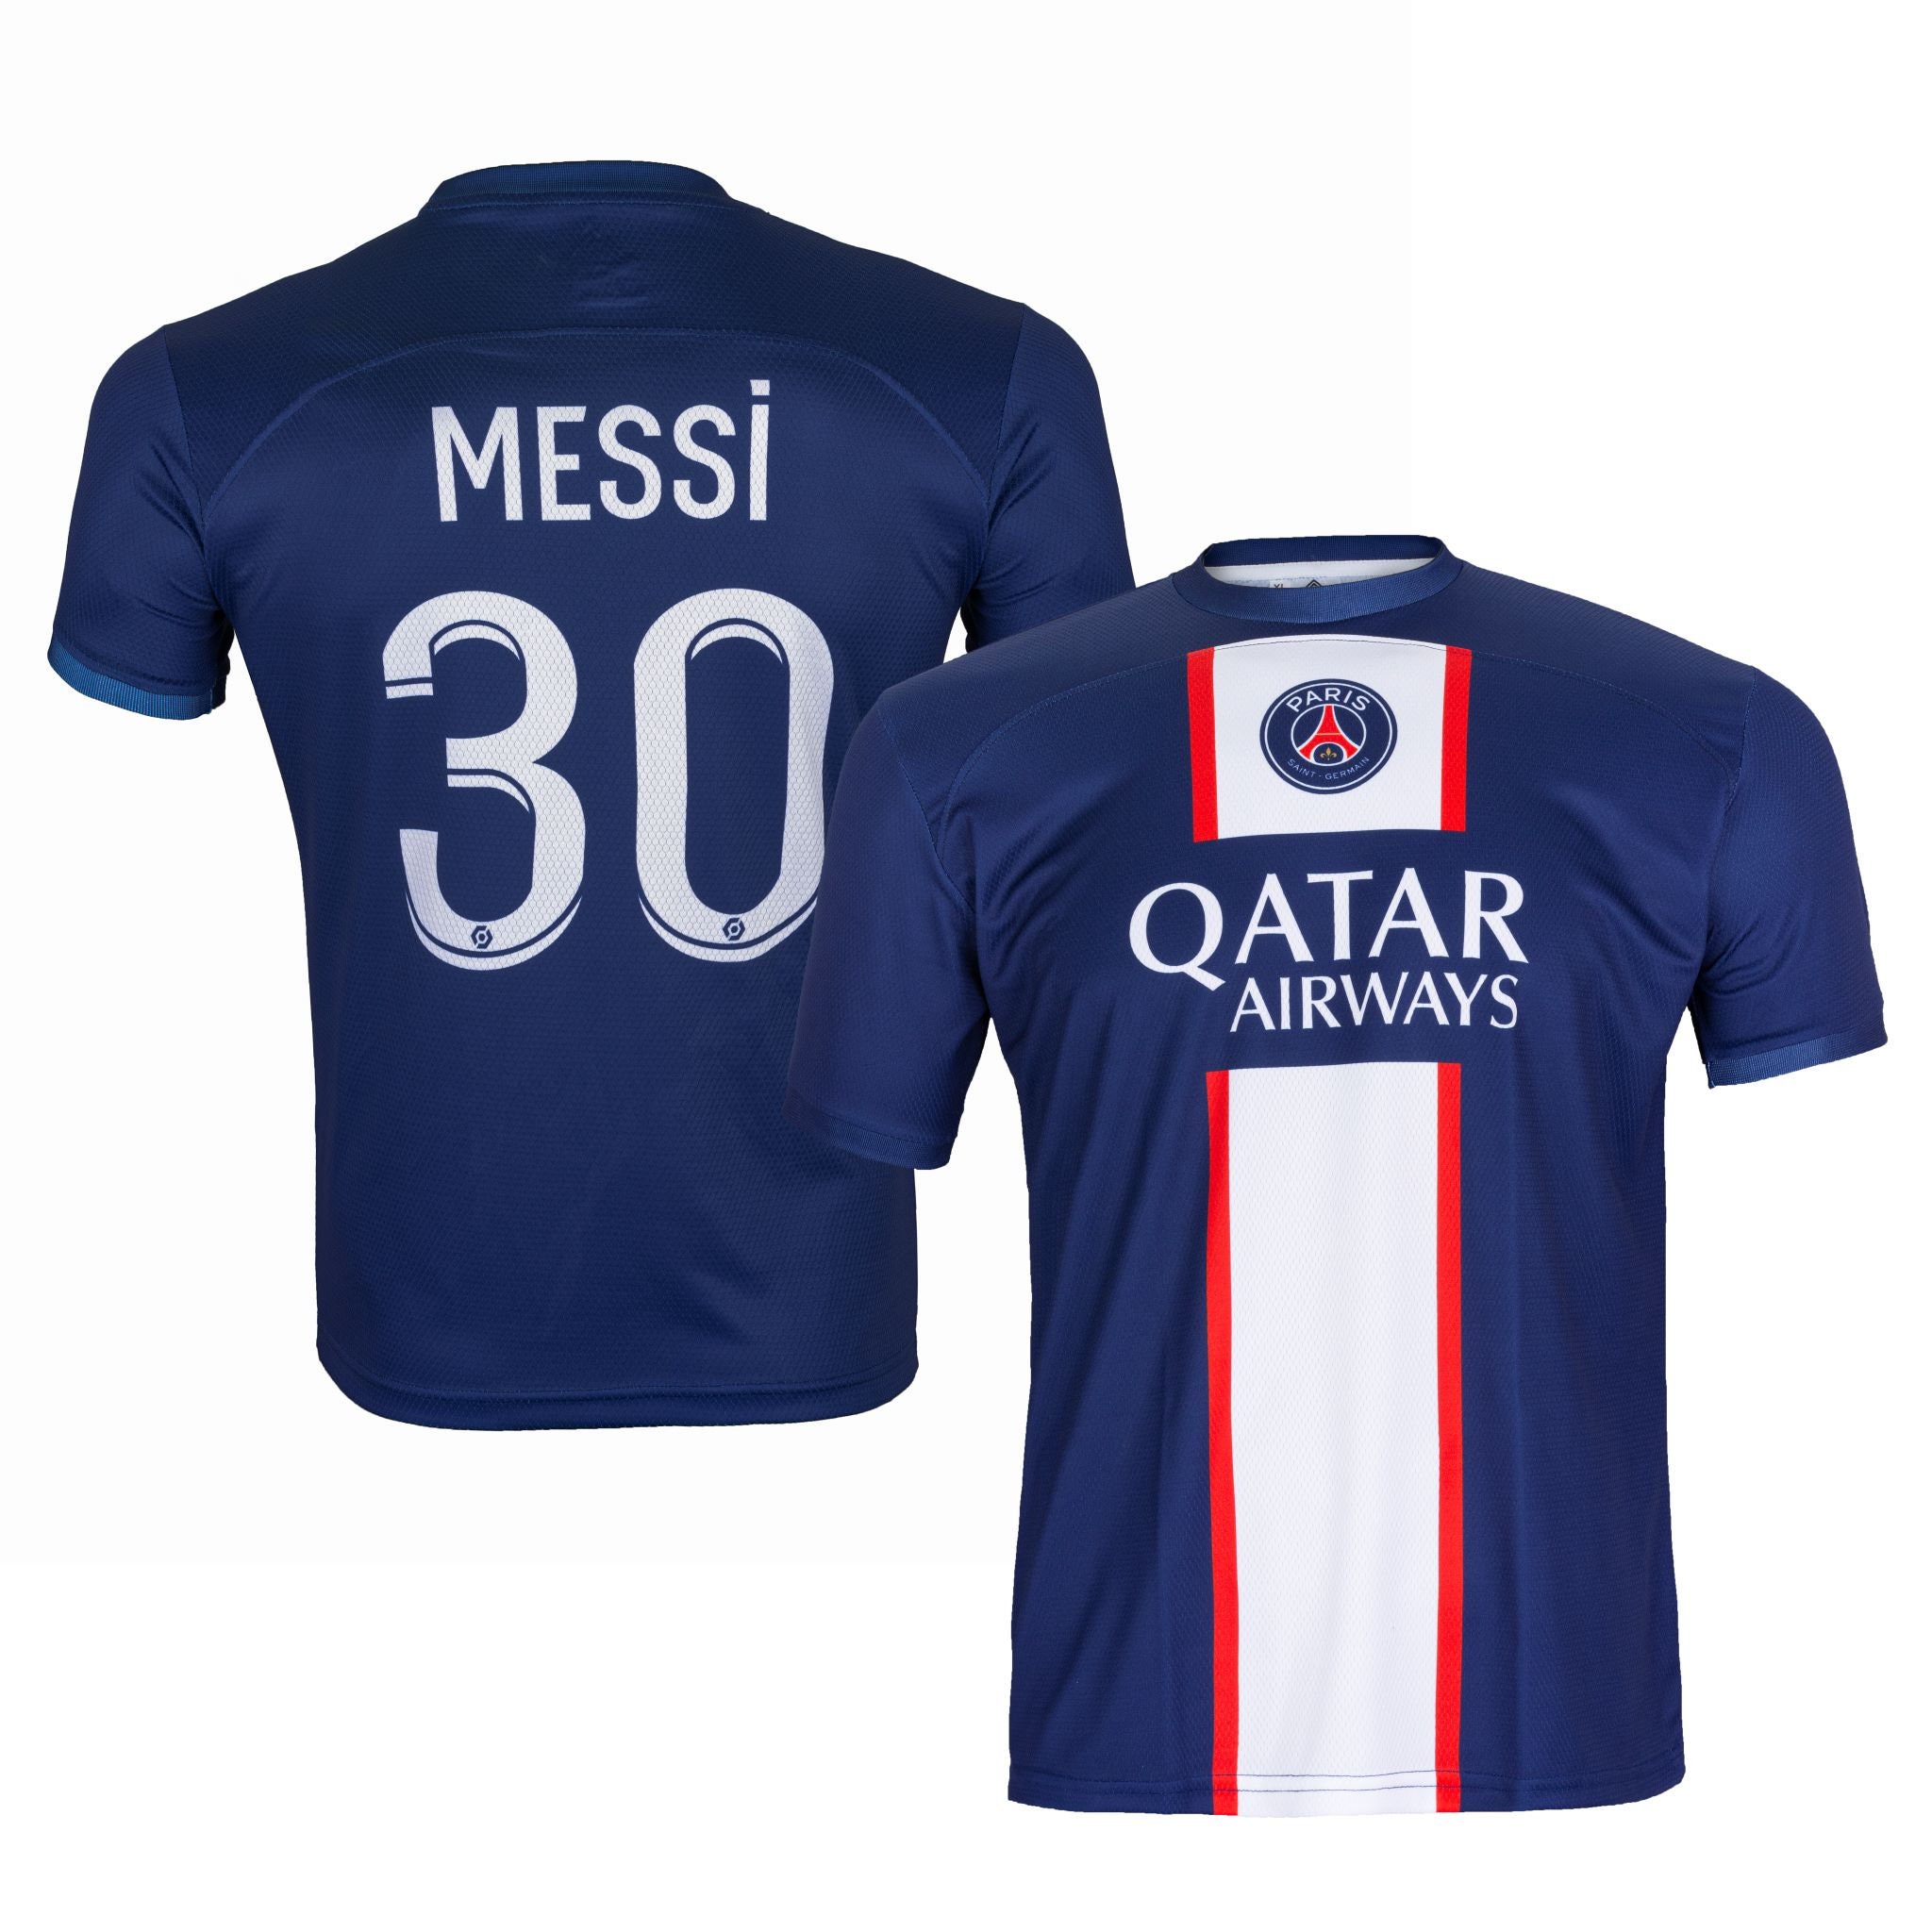 Psg messi jersey -  France